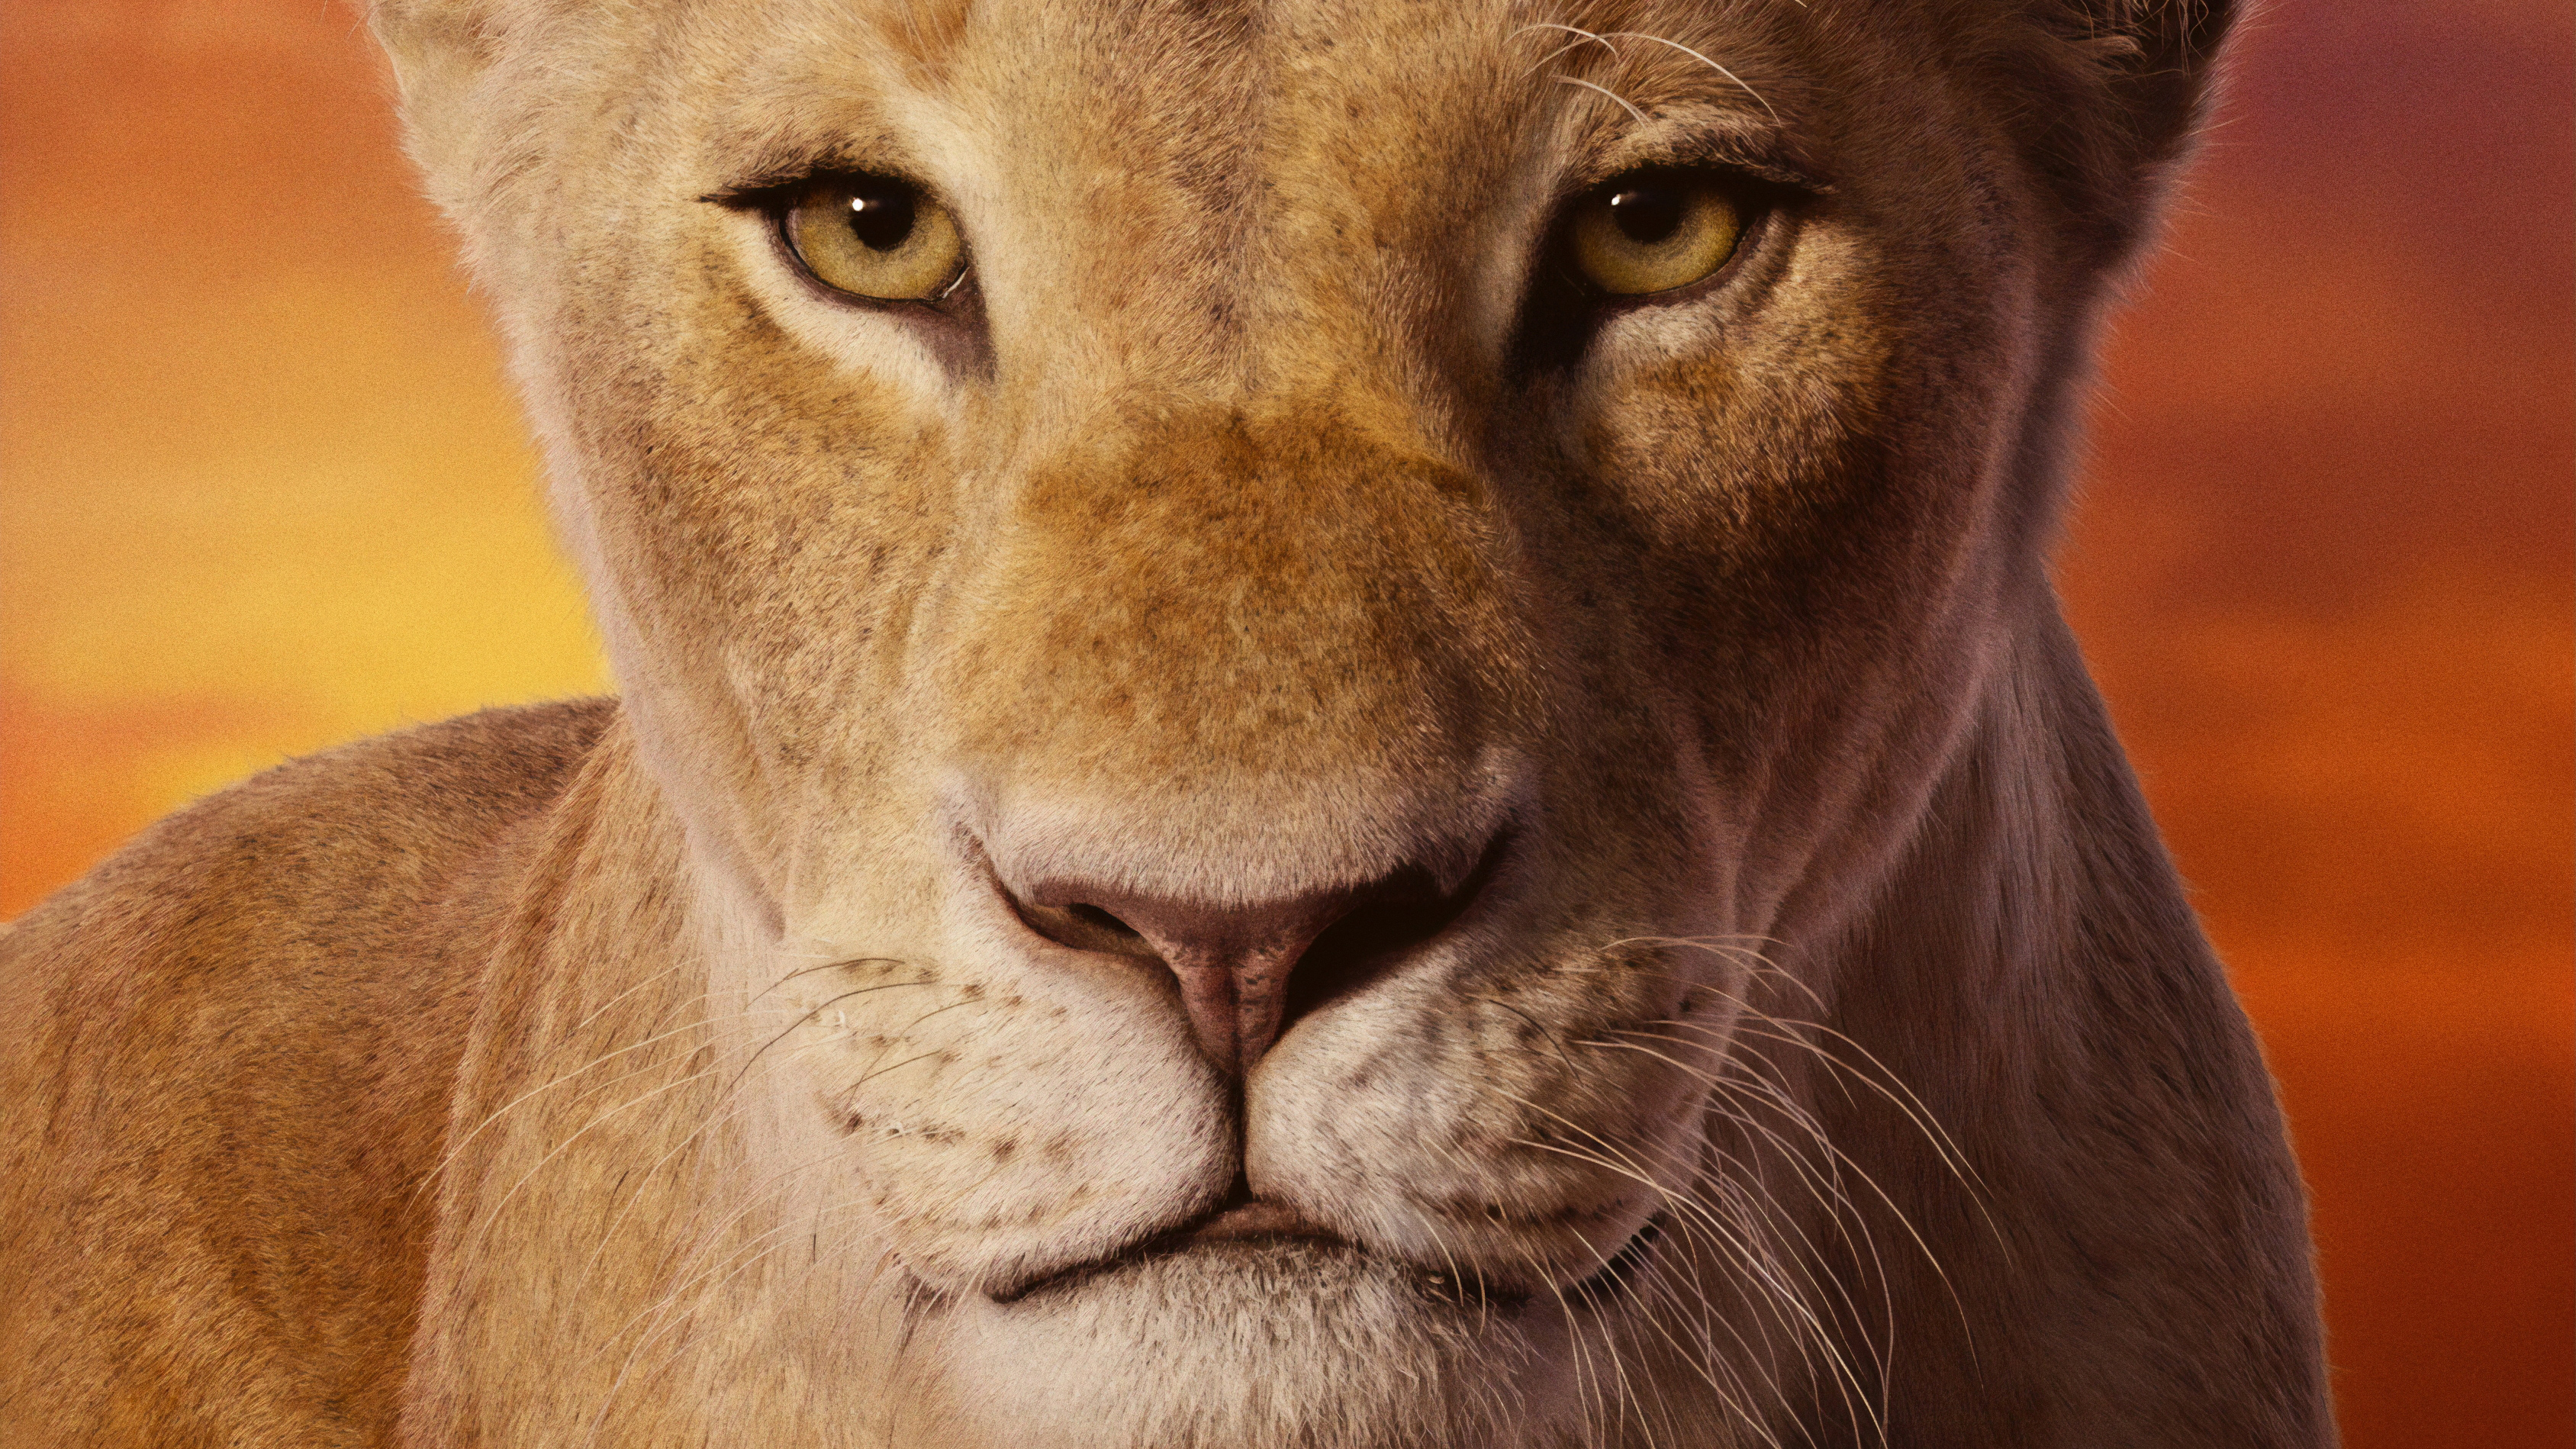 Beyonce As Nala The Lion King 2019 4k, HD Movies, 4k Wallpaper, Image, Background, Photo and Picture